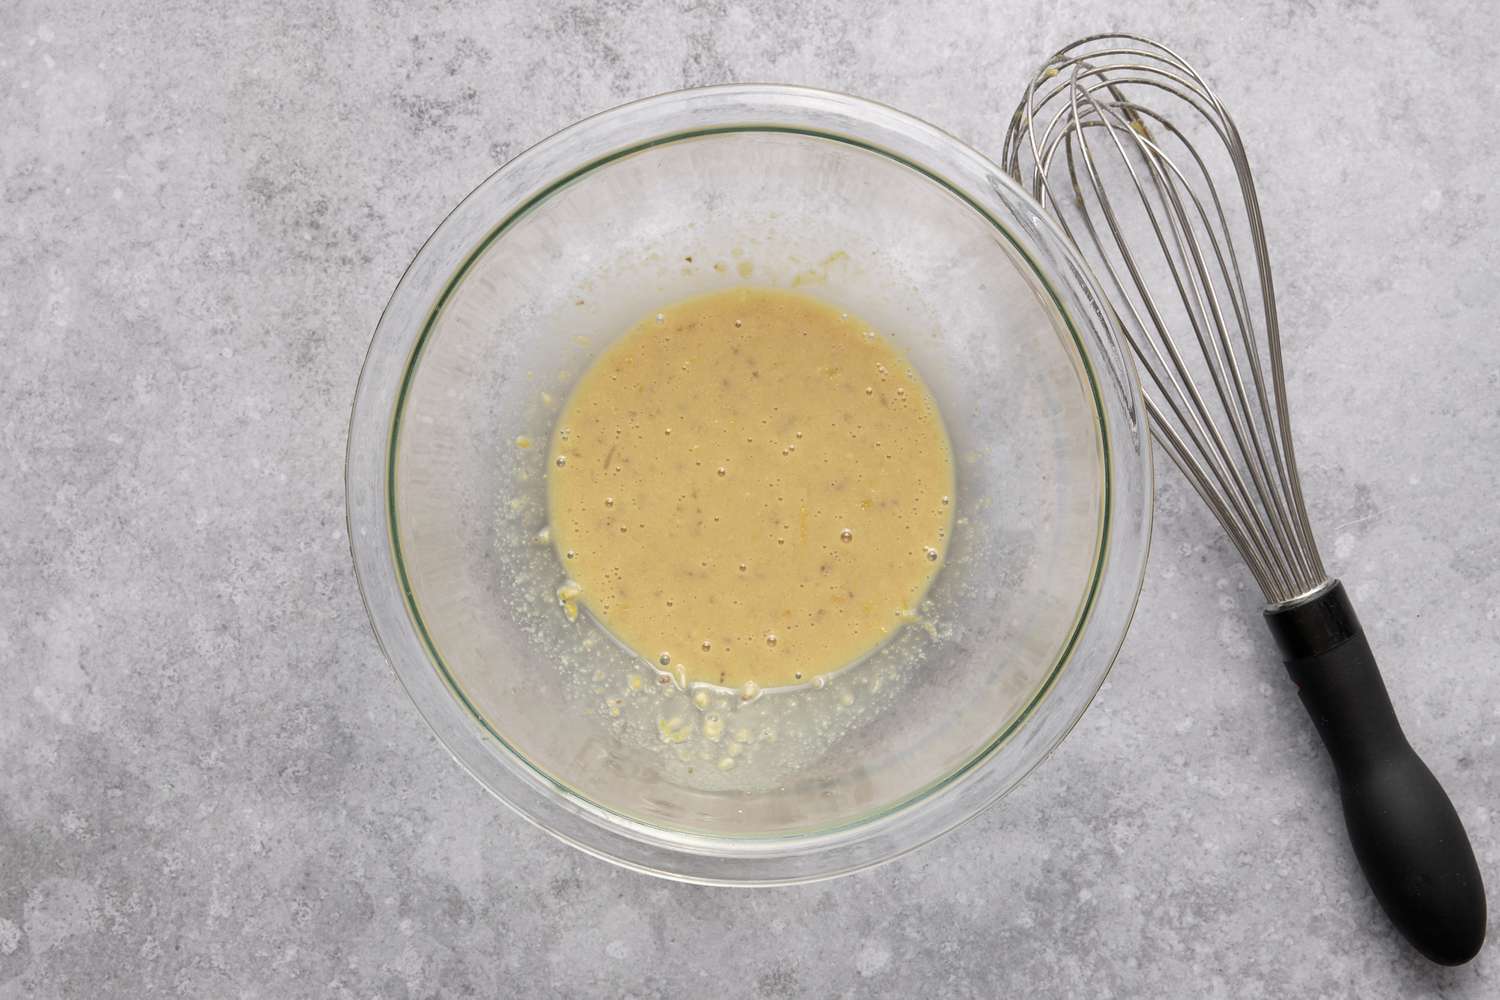 A bowl of lemon juice and zest, egg yolk, and dijon mustard with a whisk